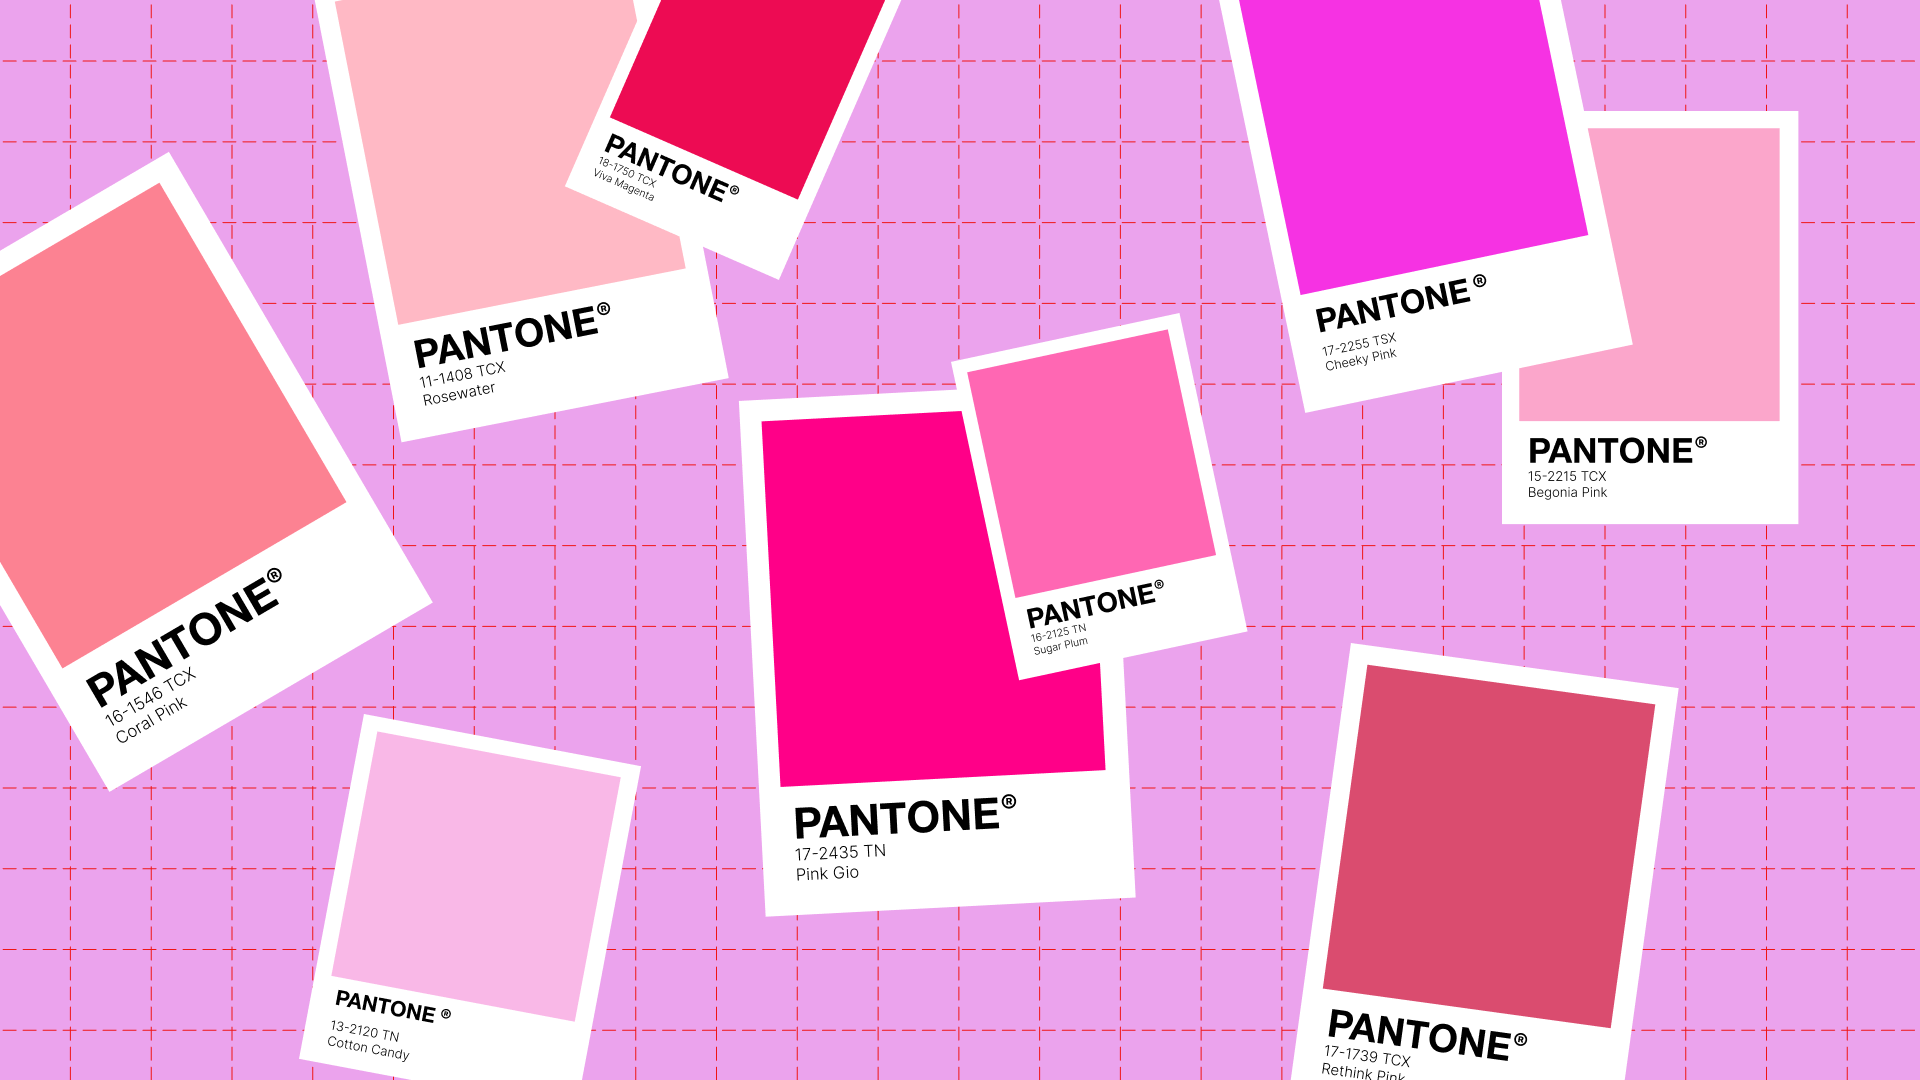 The Color Pink: Essential Color Theory, Symbolism and Design Application